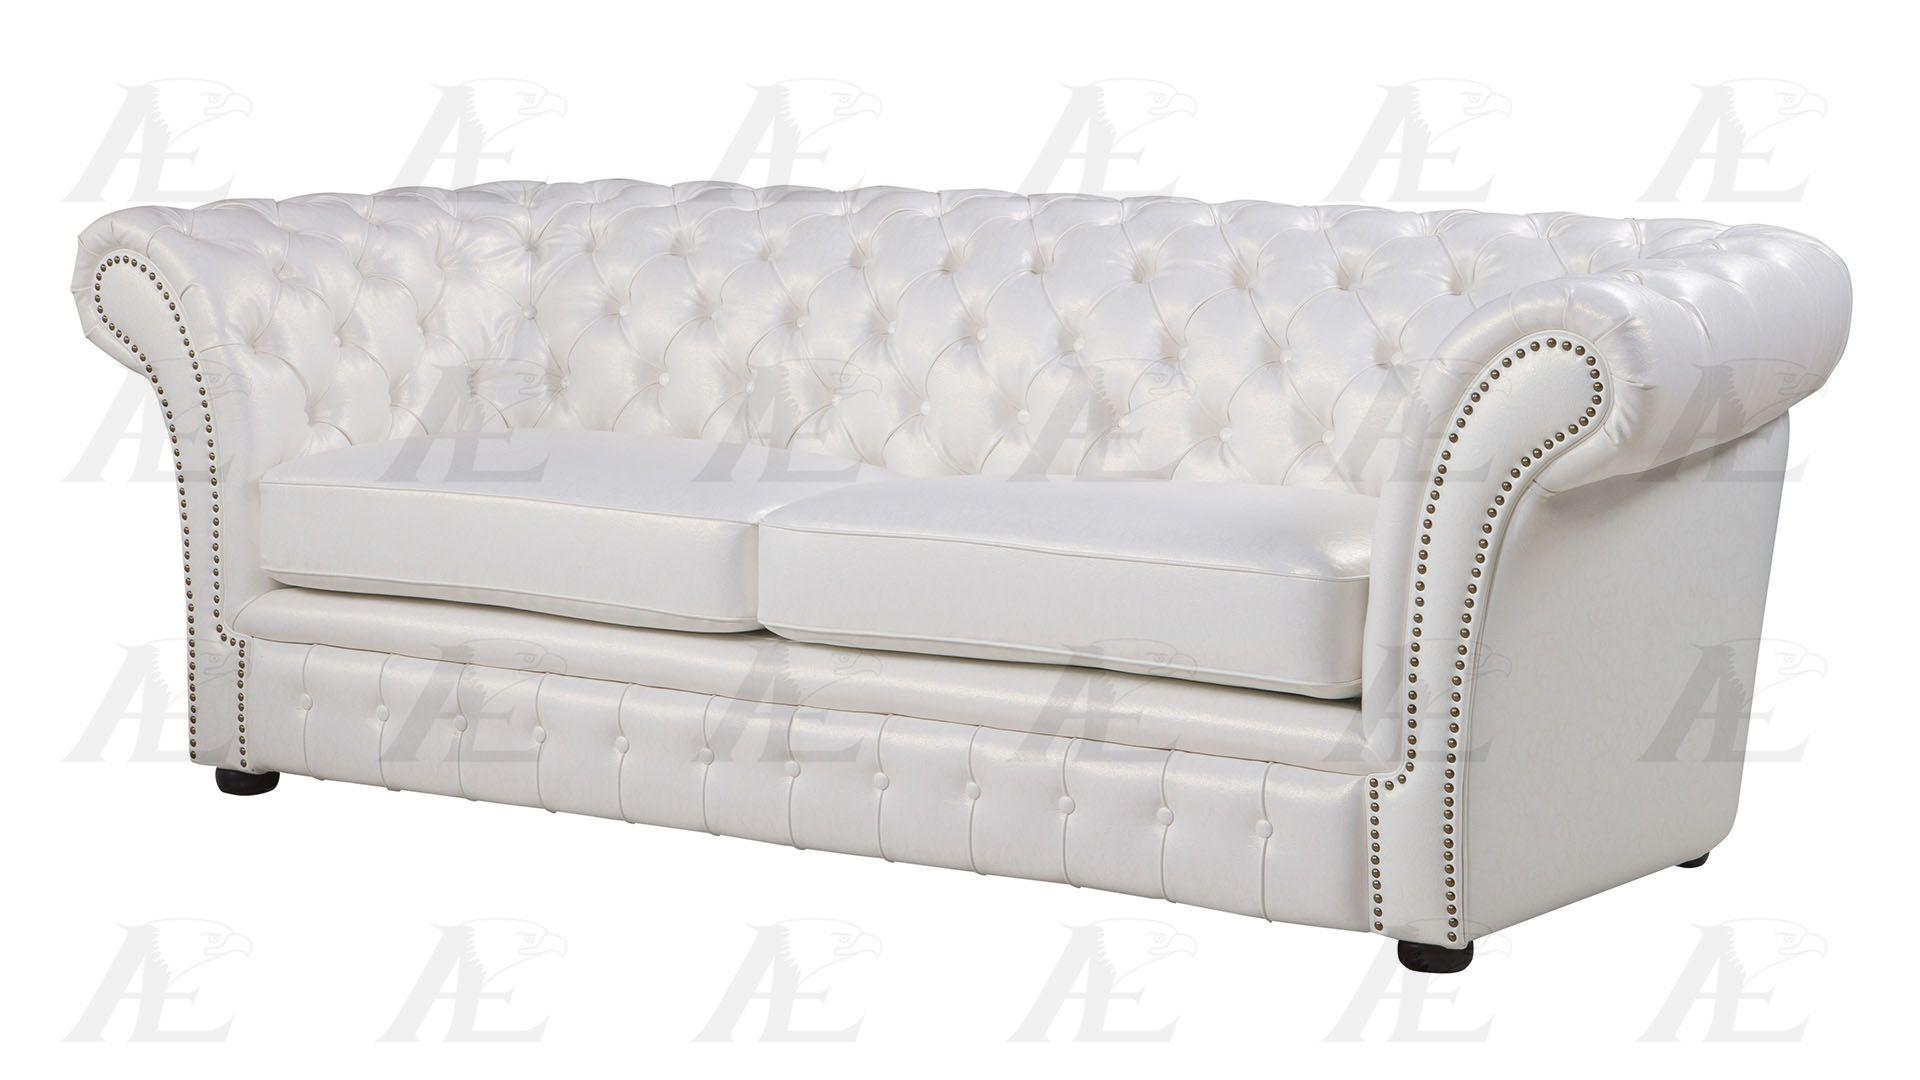 

                    
American Eagle Furniture AE508-IV Sofa Loveseat and Chair Set Ivory Bonded Leather Purchase 
